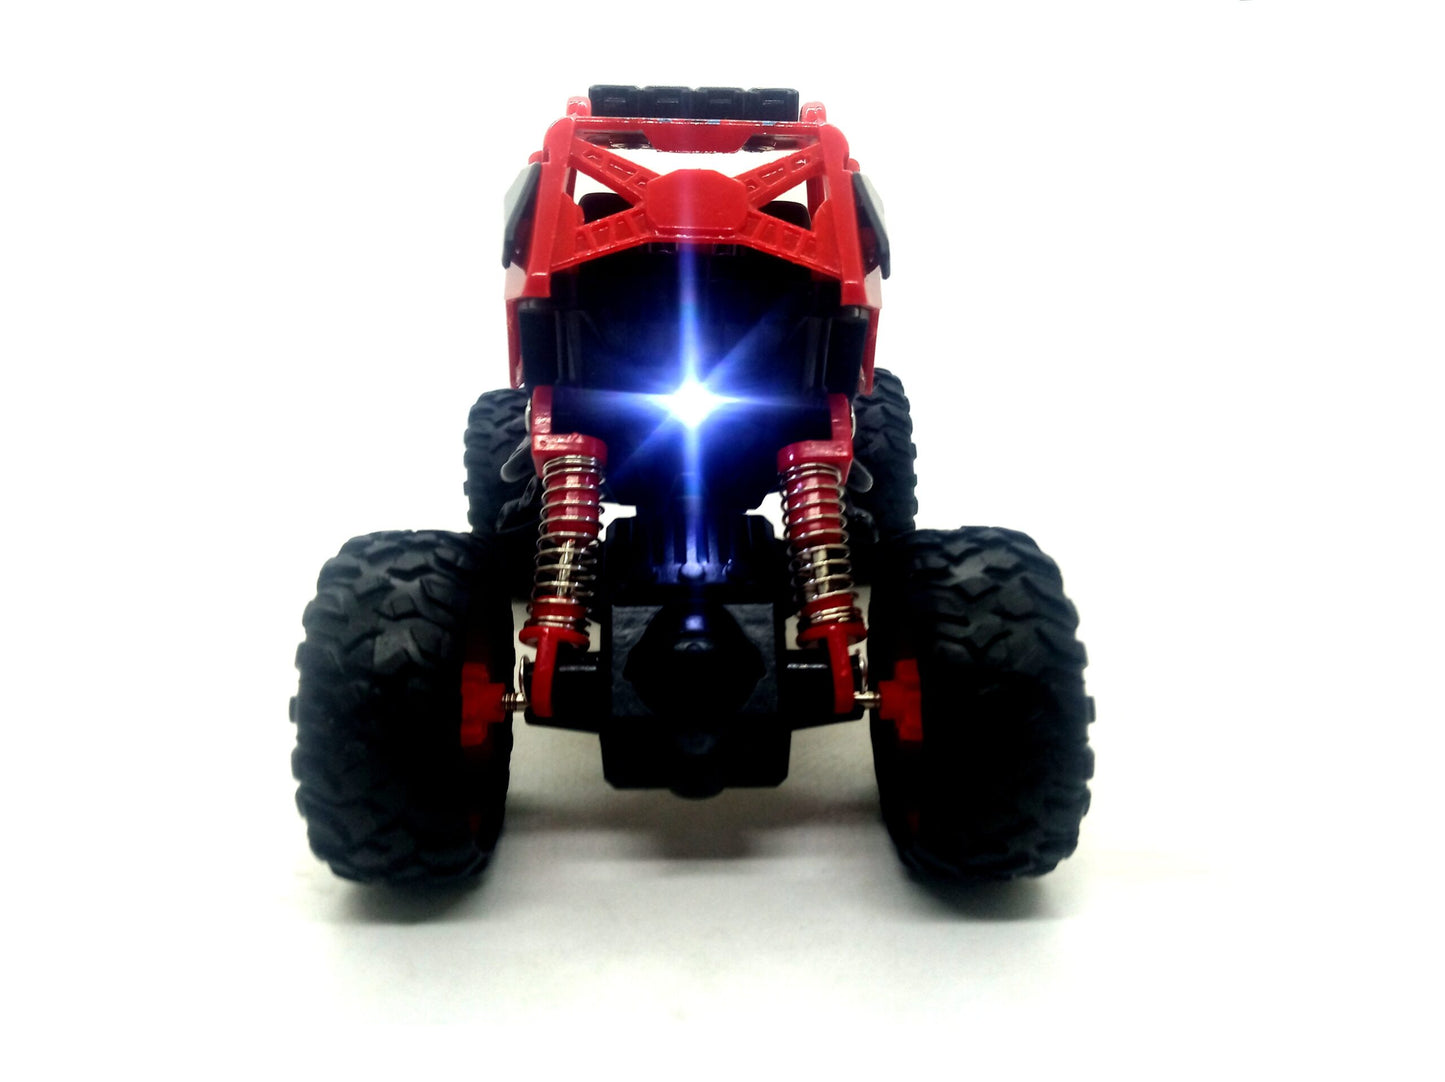 Amazing Graphic Printed Rock Crawler 2.0 Four Way Pull back Metal Die-cast High Speed Long Distance Drive Friction Powered Off-Road 4 Wheel Car Toy